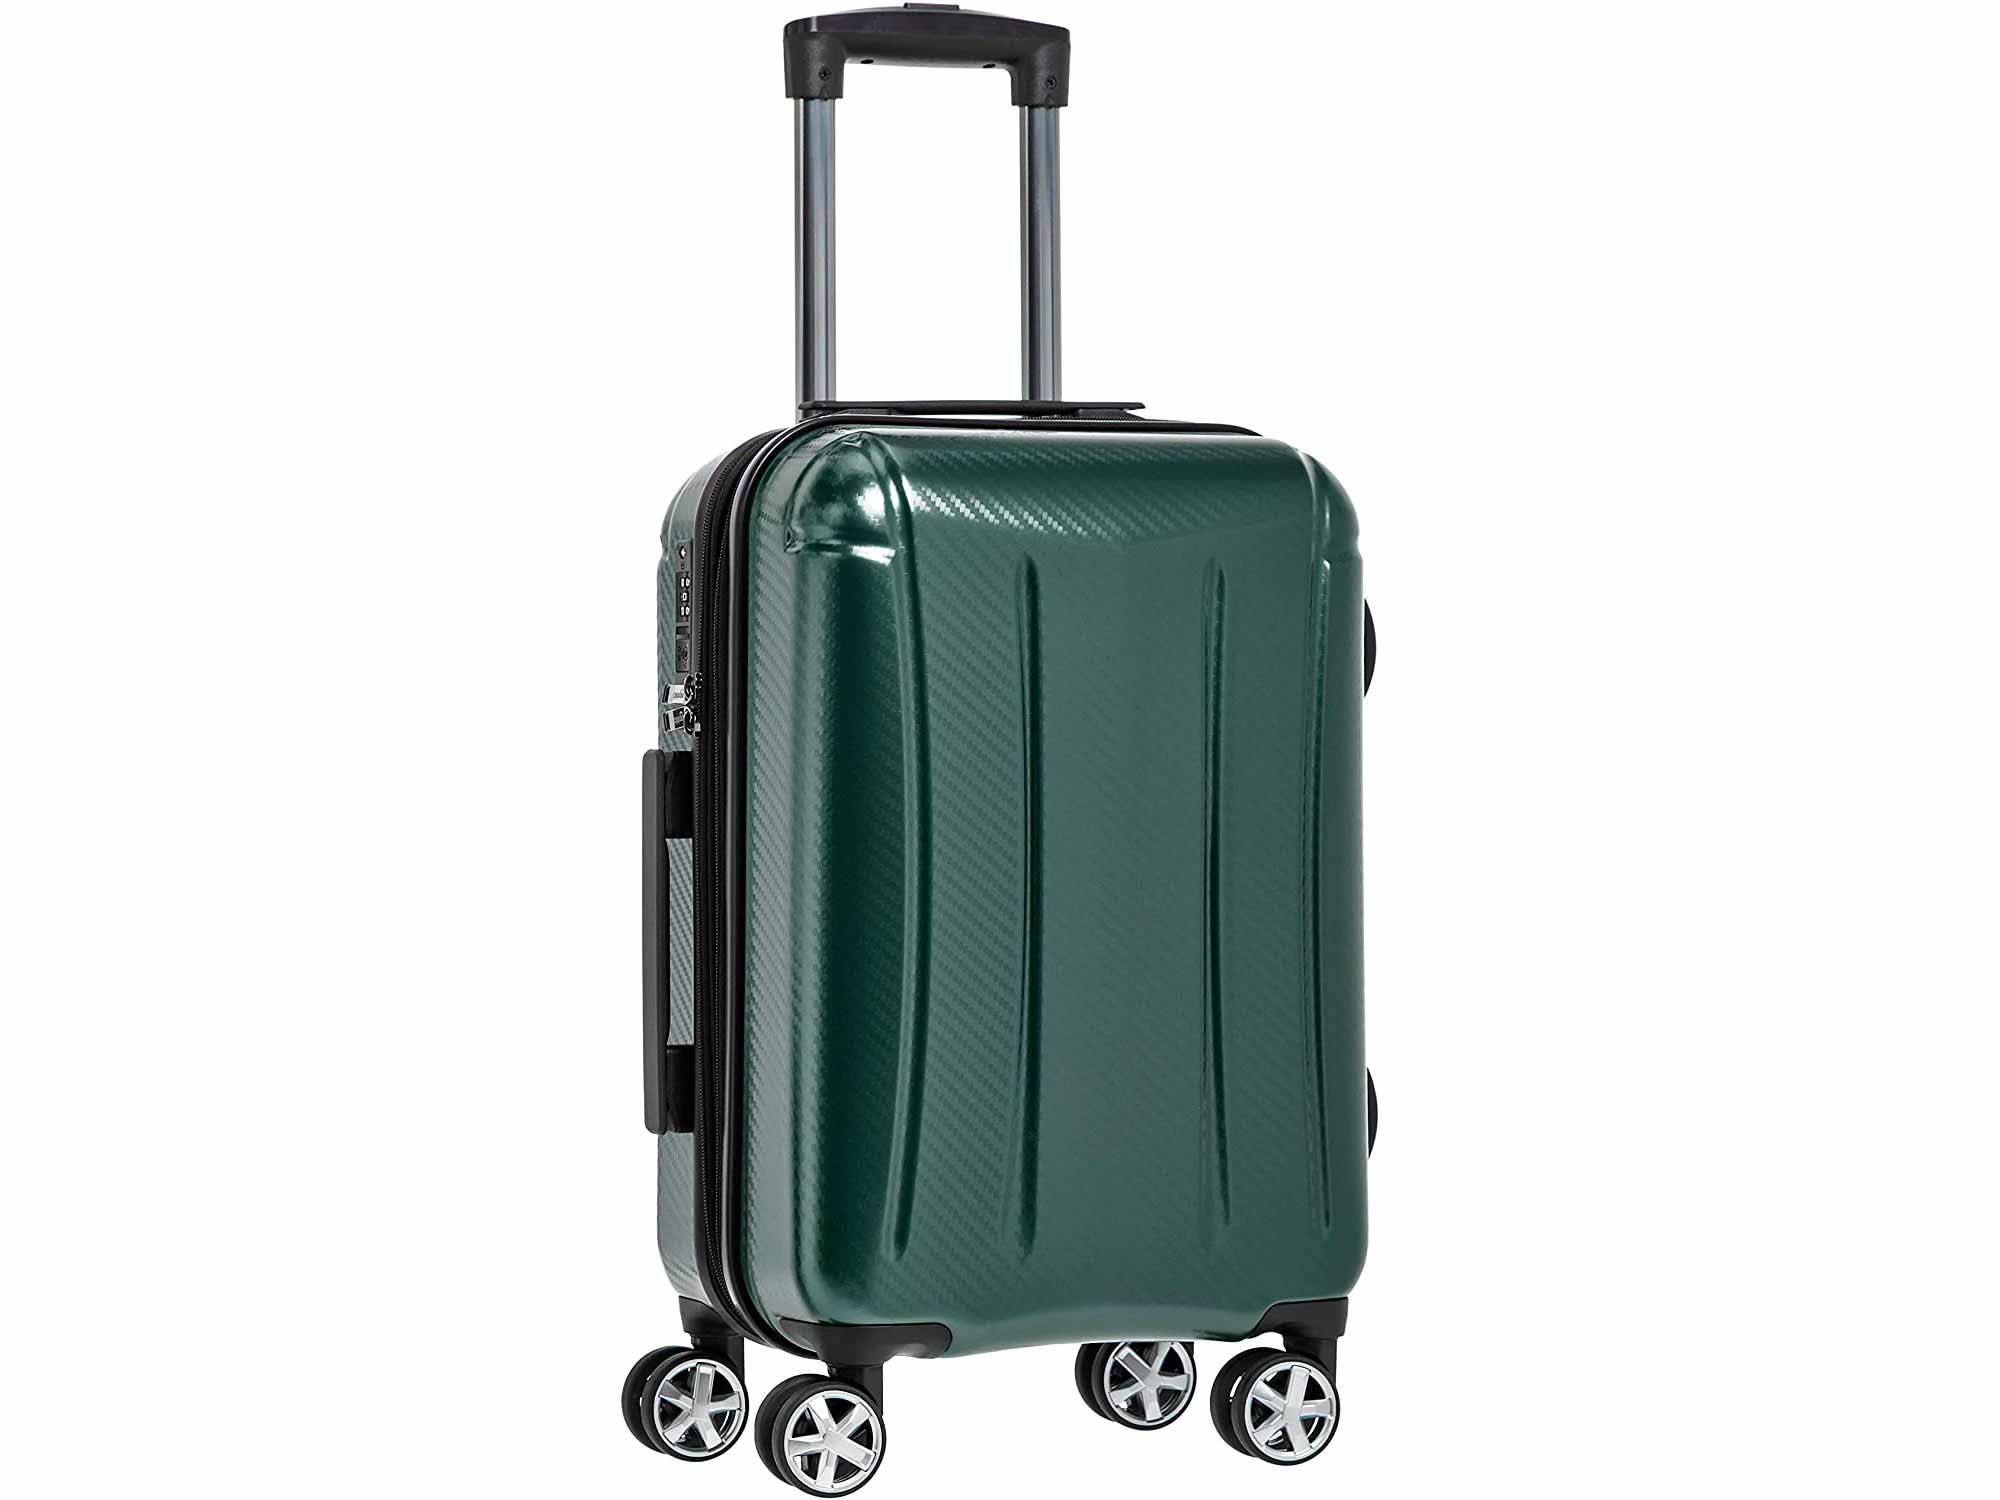 AmazonBasics Oxford Carry-On Expandable Spinner Luggage Suitcase with TSA Lock - 21.8 Inch, Green